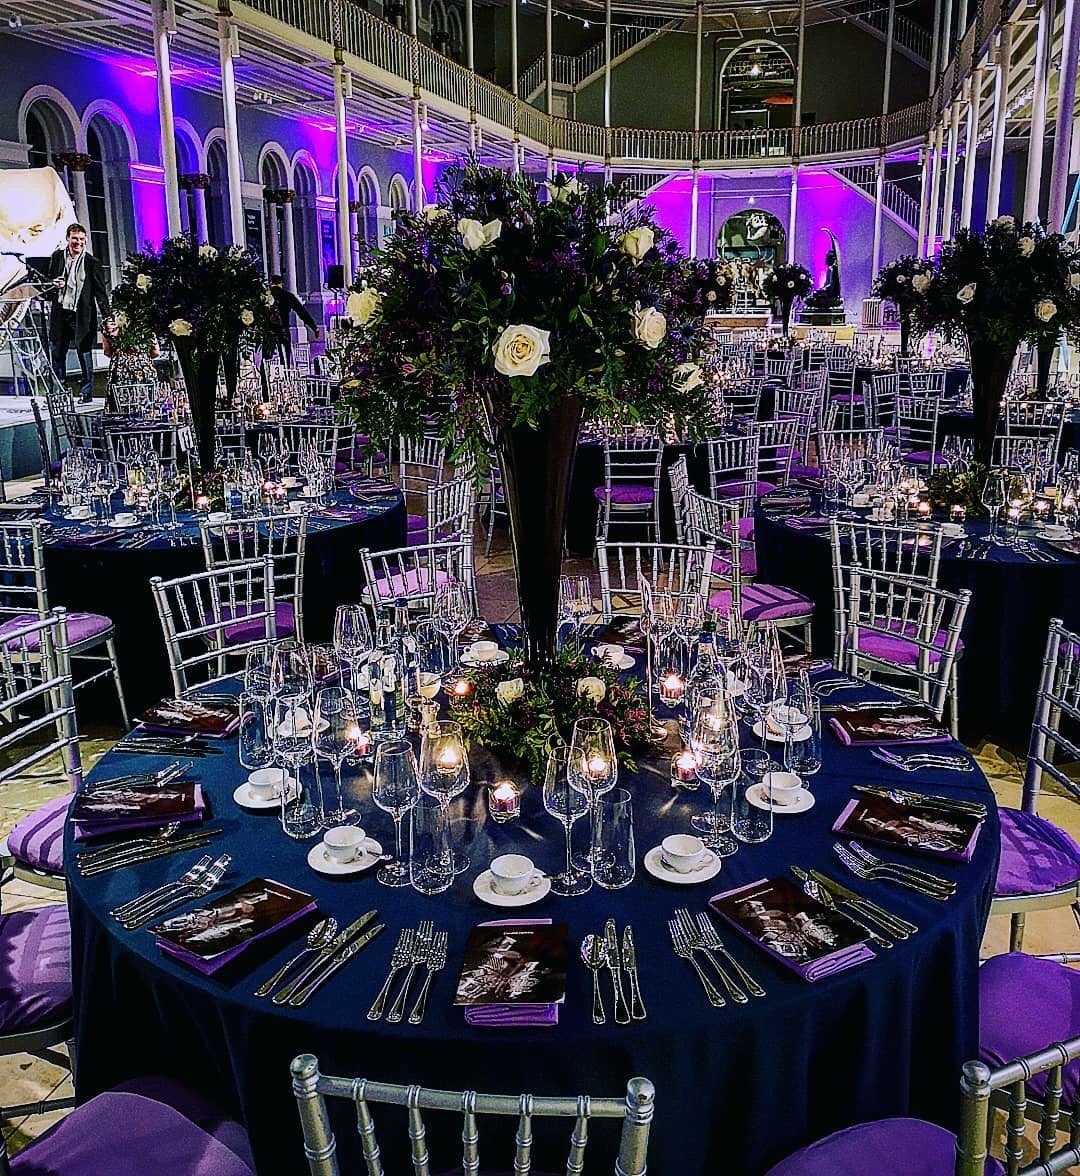 Probably the finest dining room in Scotland again tonight.. just add guests. #nationalmuseumofscotland #Edinburgh #wildethyme #eventpros #eventchef #chefphotography #eventcaterers #banqueting #purple #whiteroses #classic #frontofhouse #cheflife